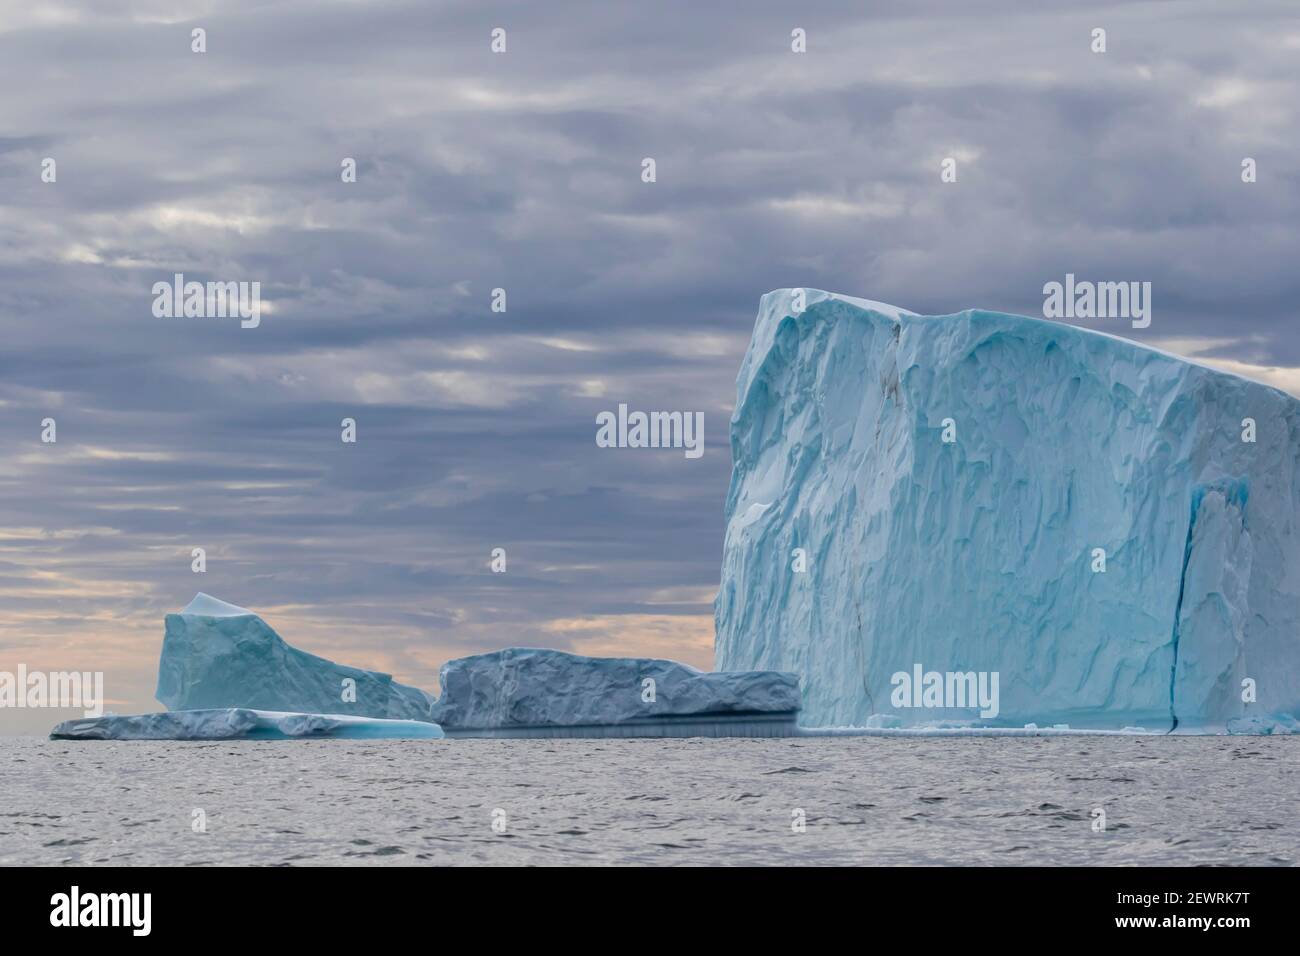 Huge icebergs at Cape Brewster, the easternmost point of the jagged and mountainous Savoia Peninsula, Greenland, Polar Regions Stock Photo